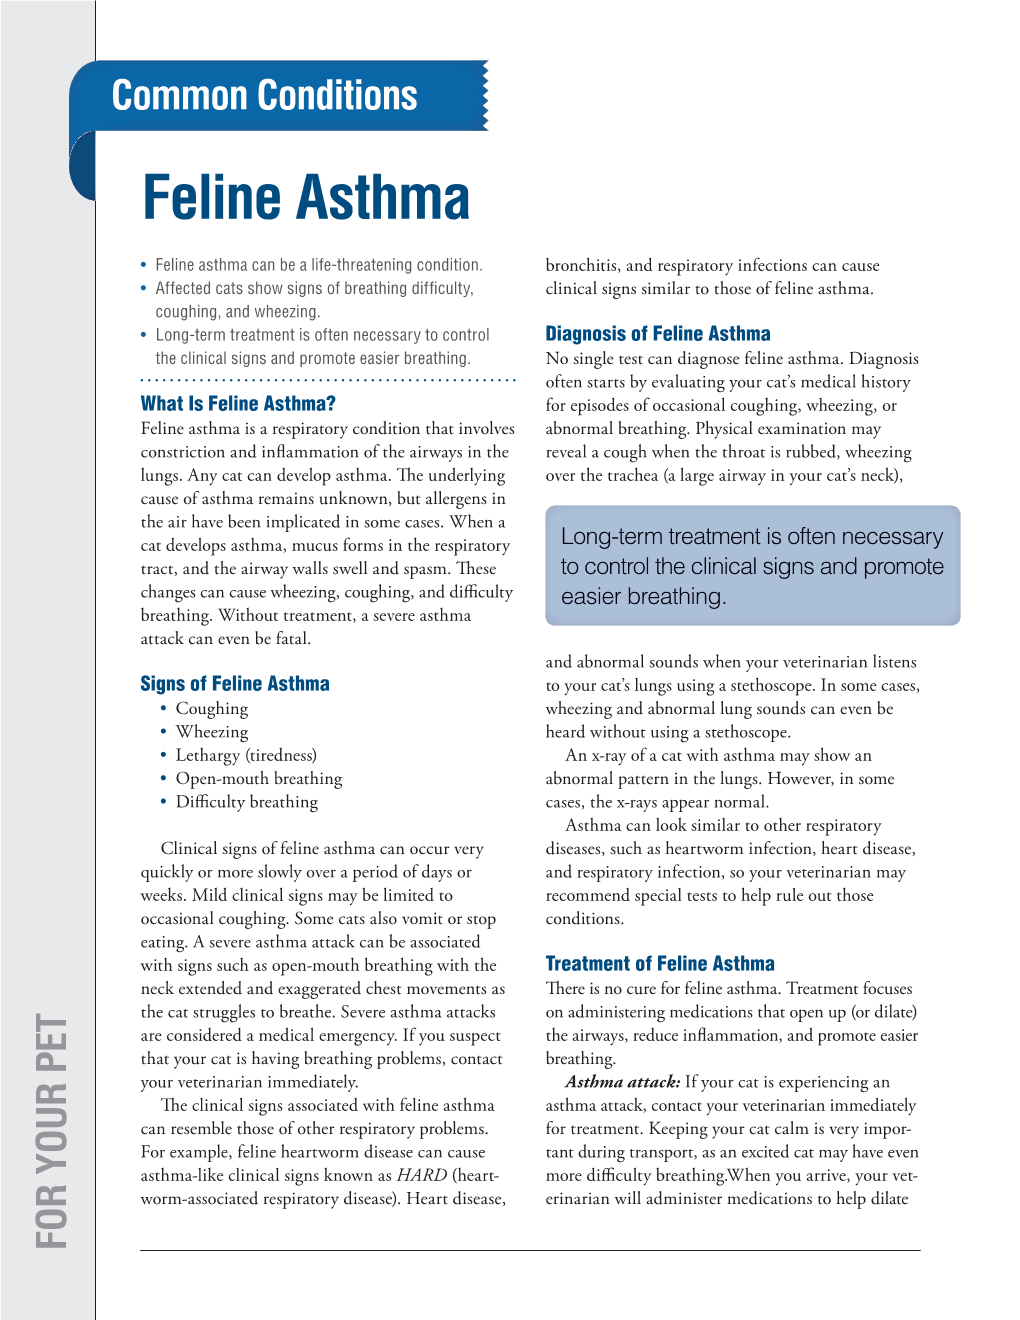 Feline Asthma Feline Is Asthma? What • • • Feline Asthma the Clinical Signs and Promote Easier Breathing